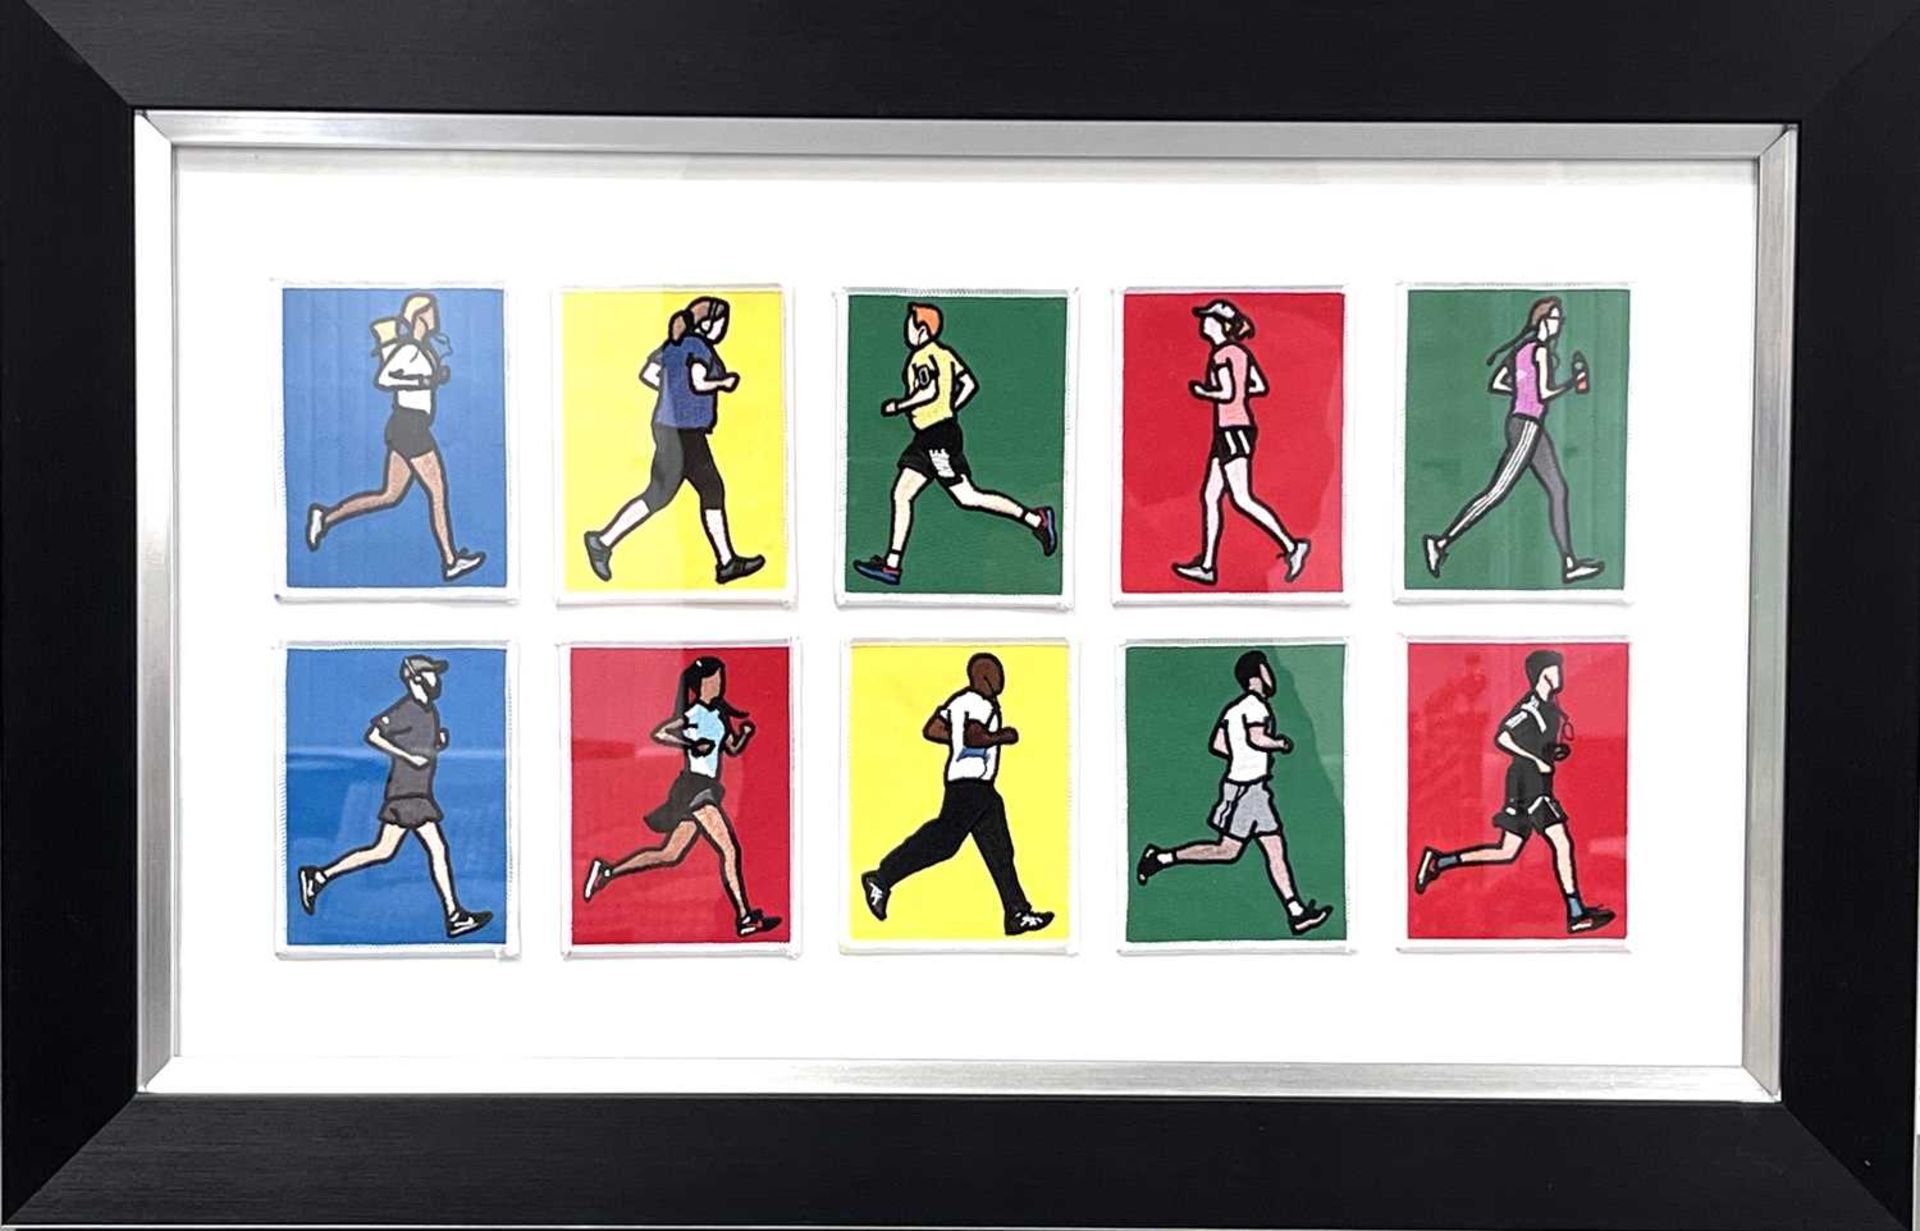 Julian Opie (b.1958), 'London Joggers', a series of ten embroidered fabric patches, each 10 cm x 7.5